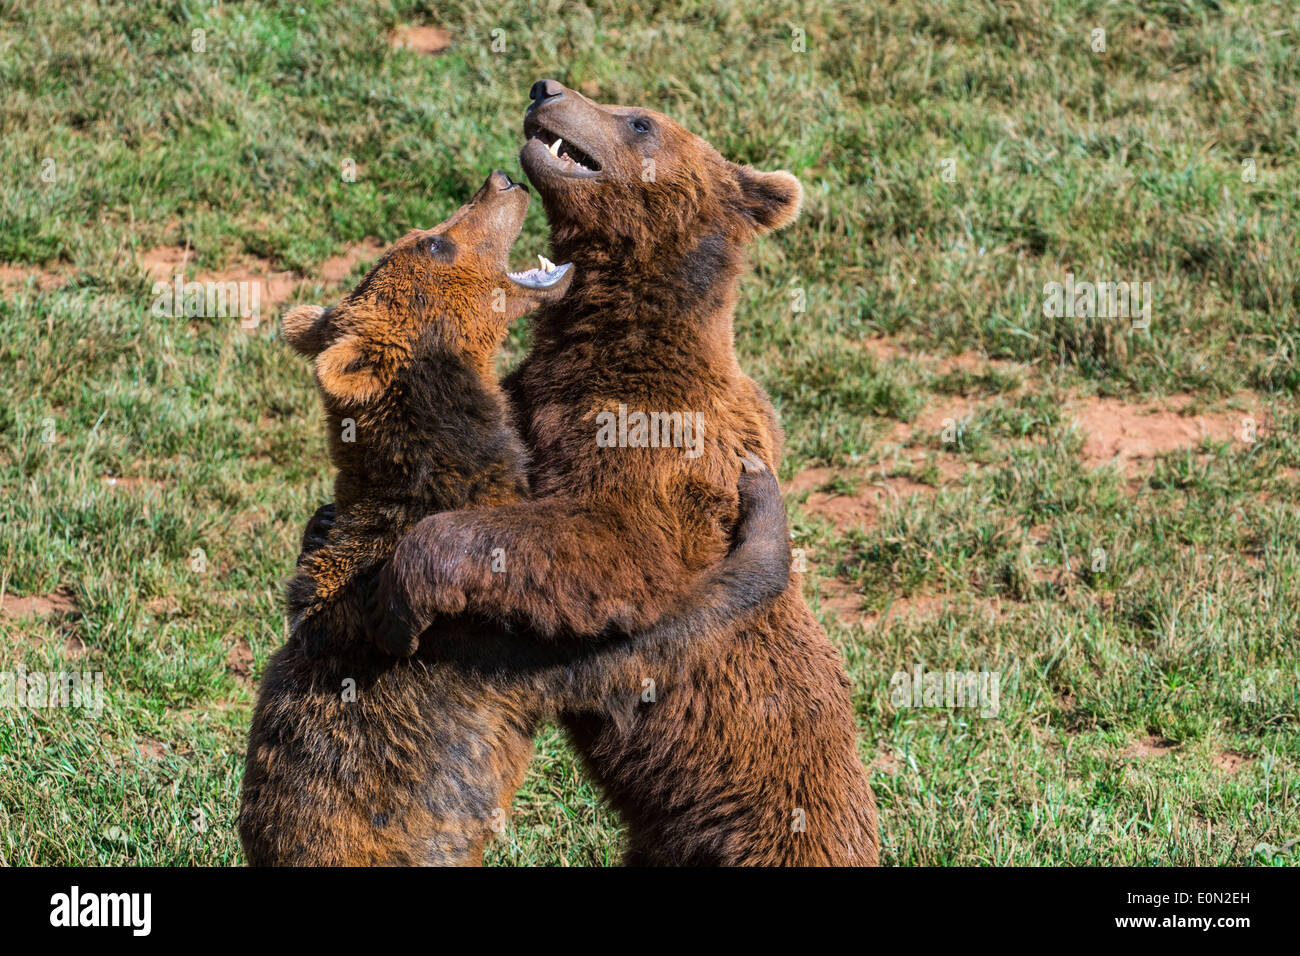 Two aggressive territorial Eurasian brown bears (Ursus arctos arctos) fighting while standing upright on hind legs Stock Photo